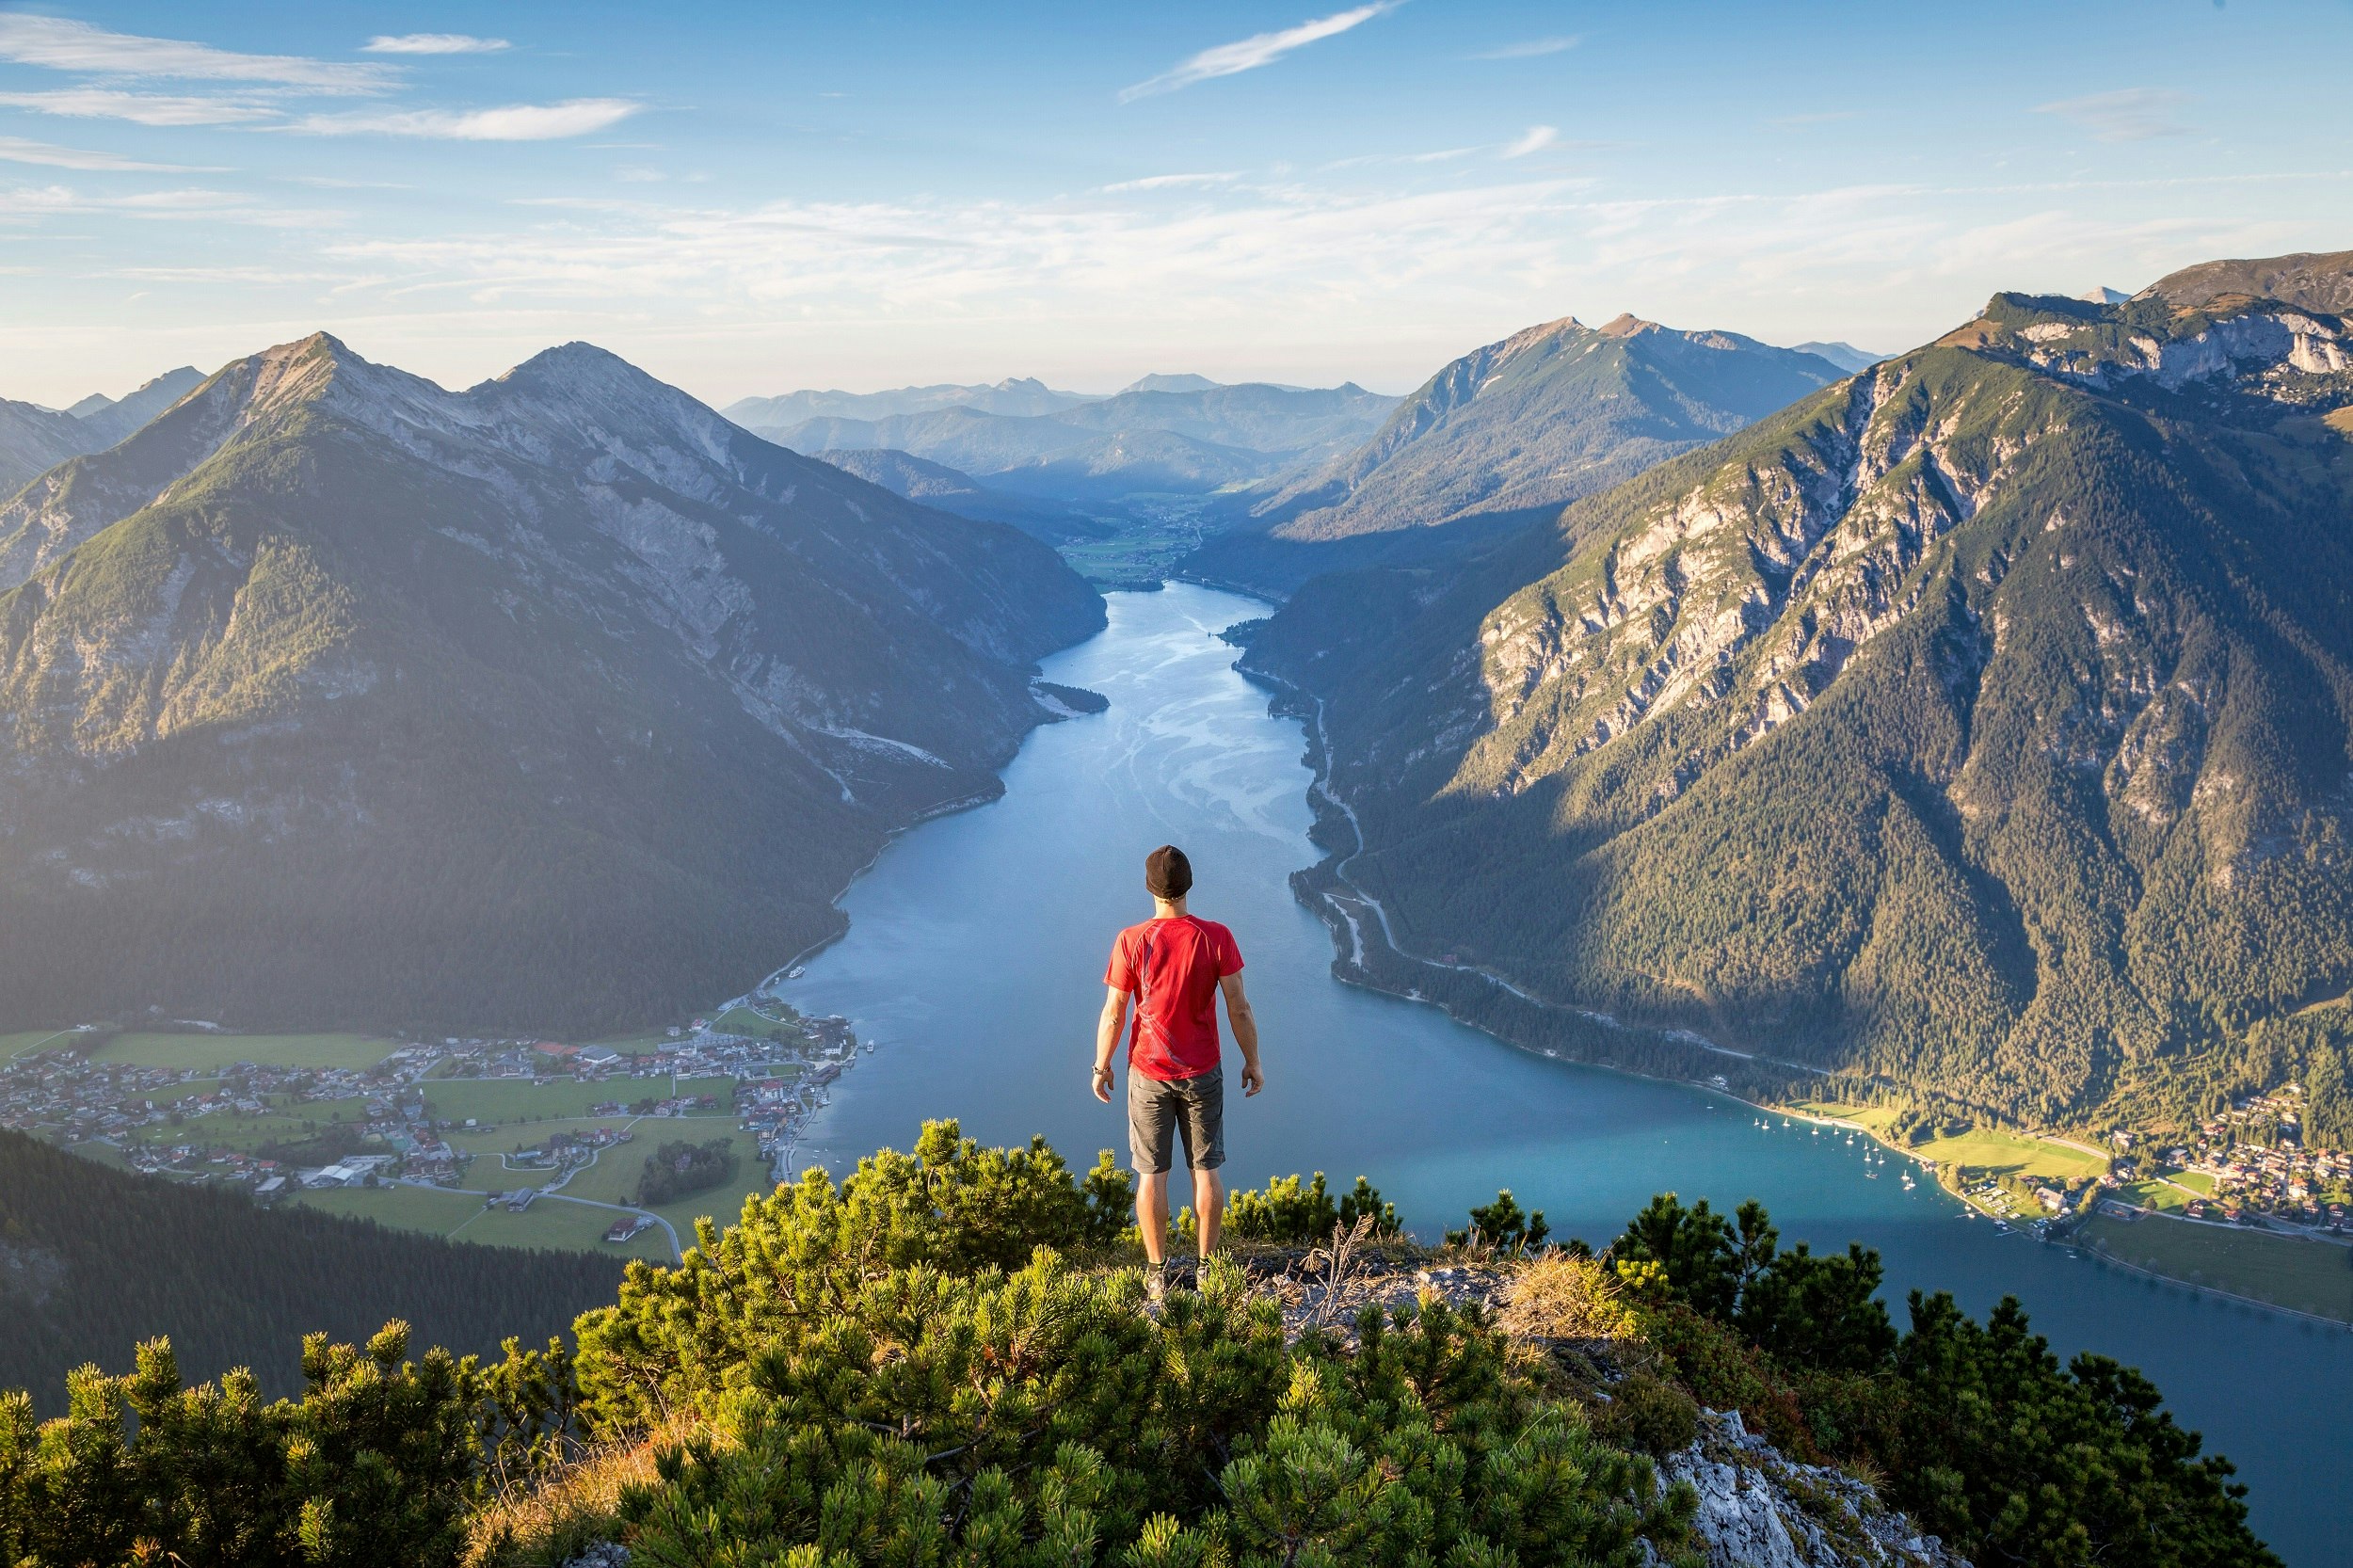 A man wearing shorts, t-shirt and black beany stands on an outcrop and looks out over a spectacular valley lake; mountains climb on all sides.